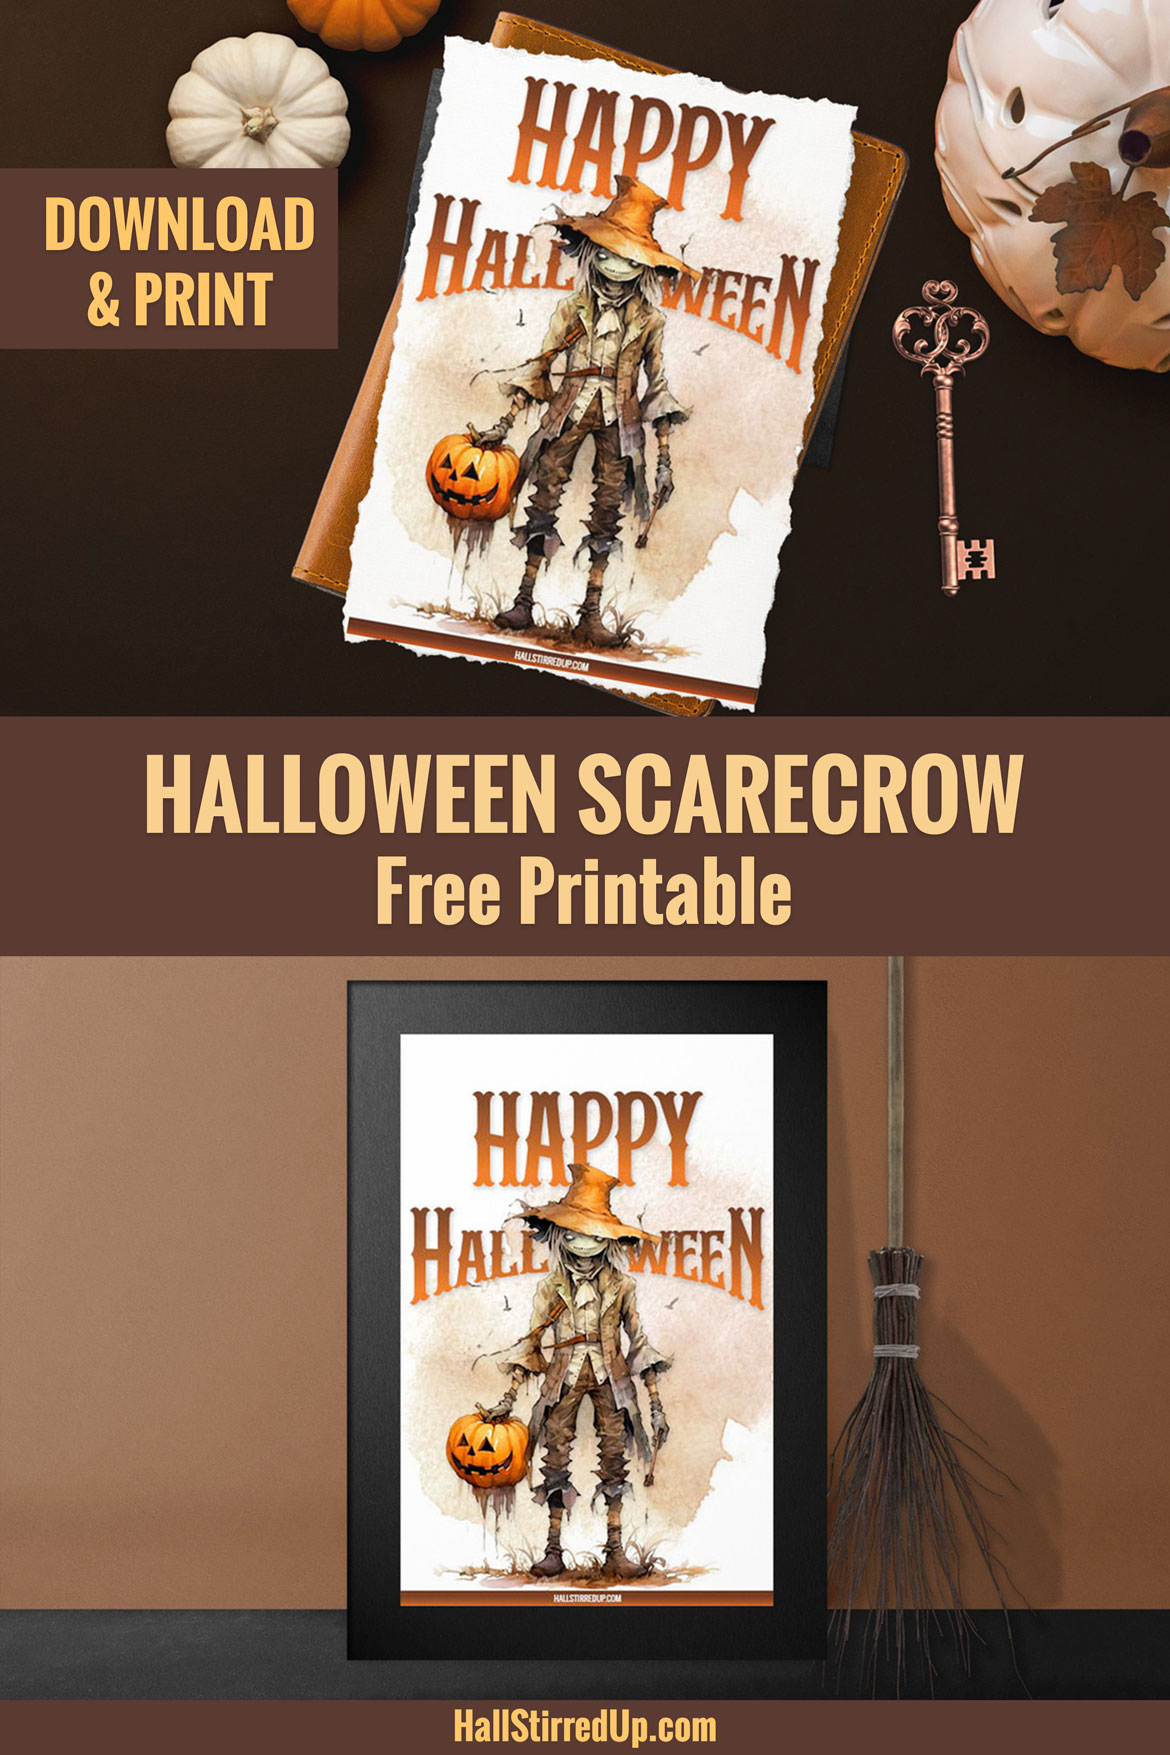 Download a free scary scarecrow Halloween printable